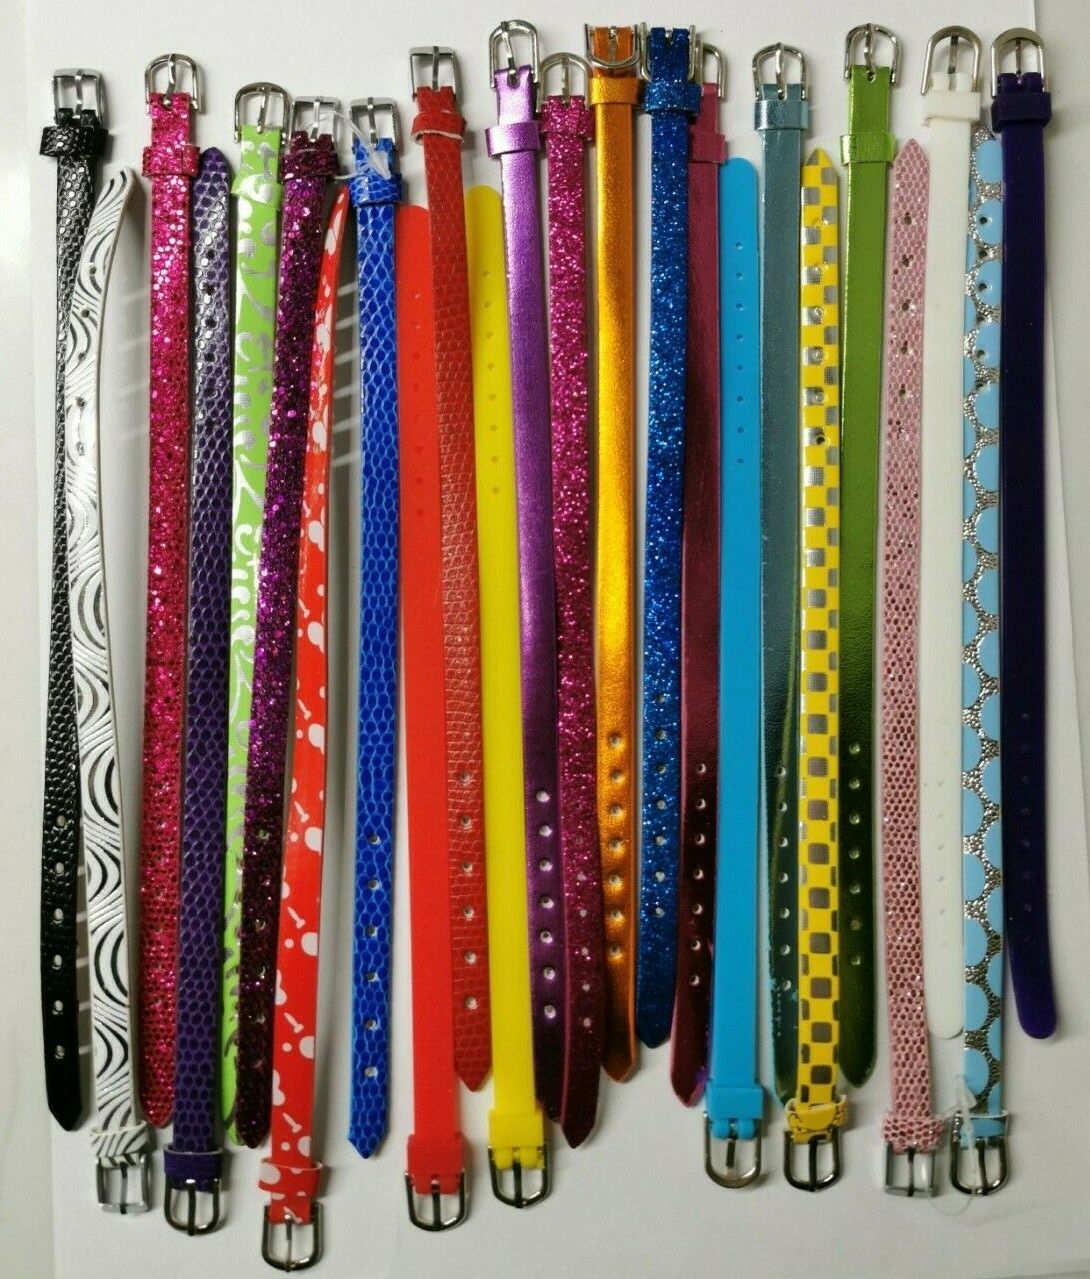 Wholesale Joblot of 50 Mixed Buckled Thin Strap Bracelets Glitter, Faux Leather